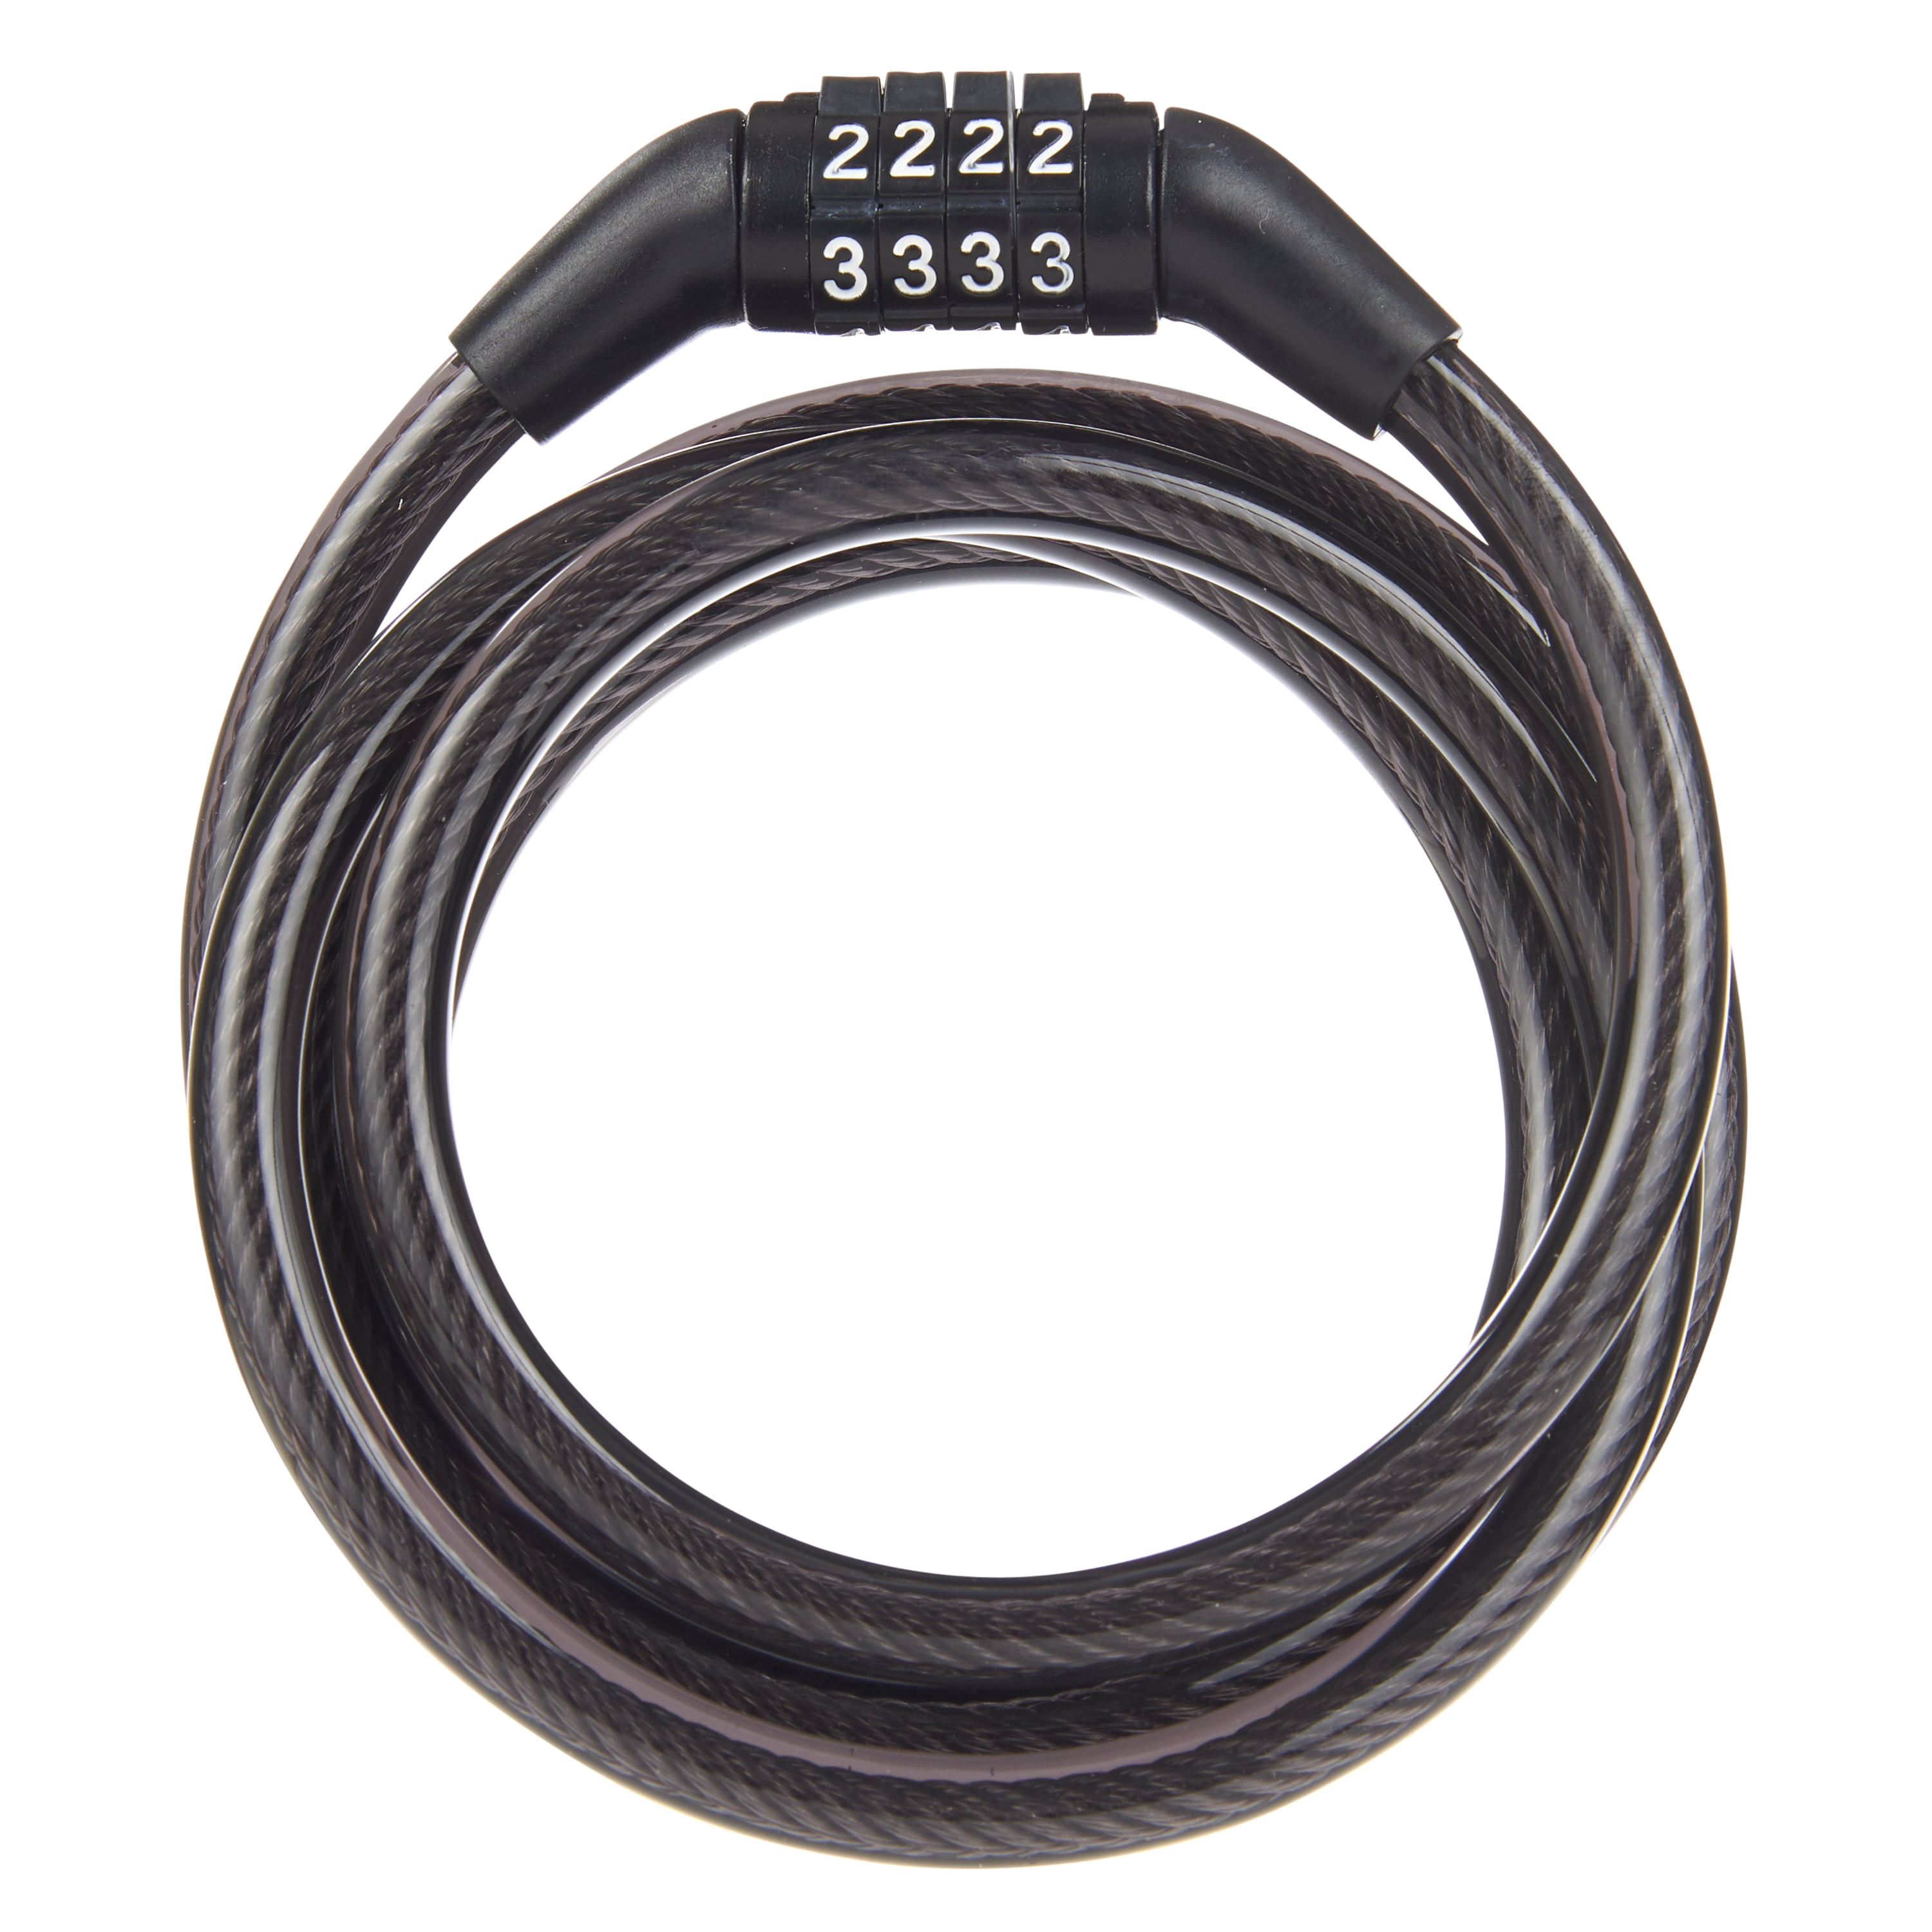 Brinks 5/16 in. x 5 ft. Vinyl Covered Flexible Steel Combination Cable Lock